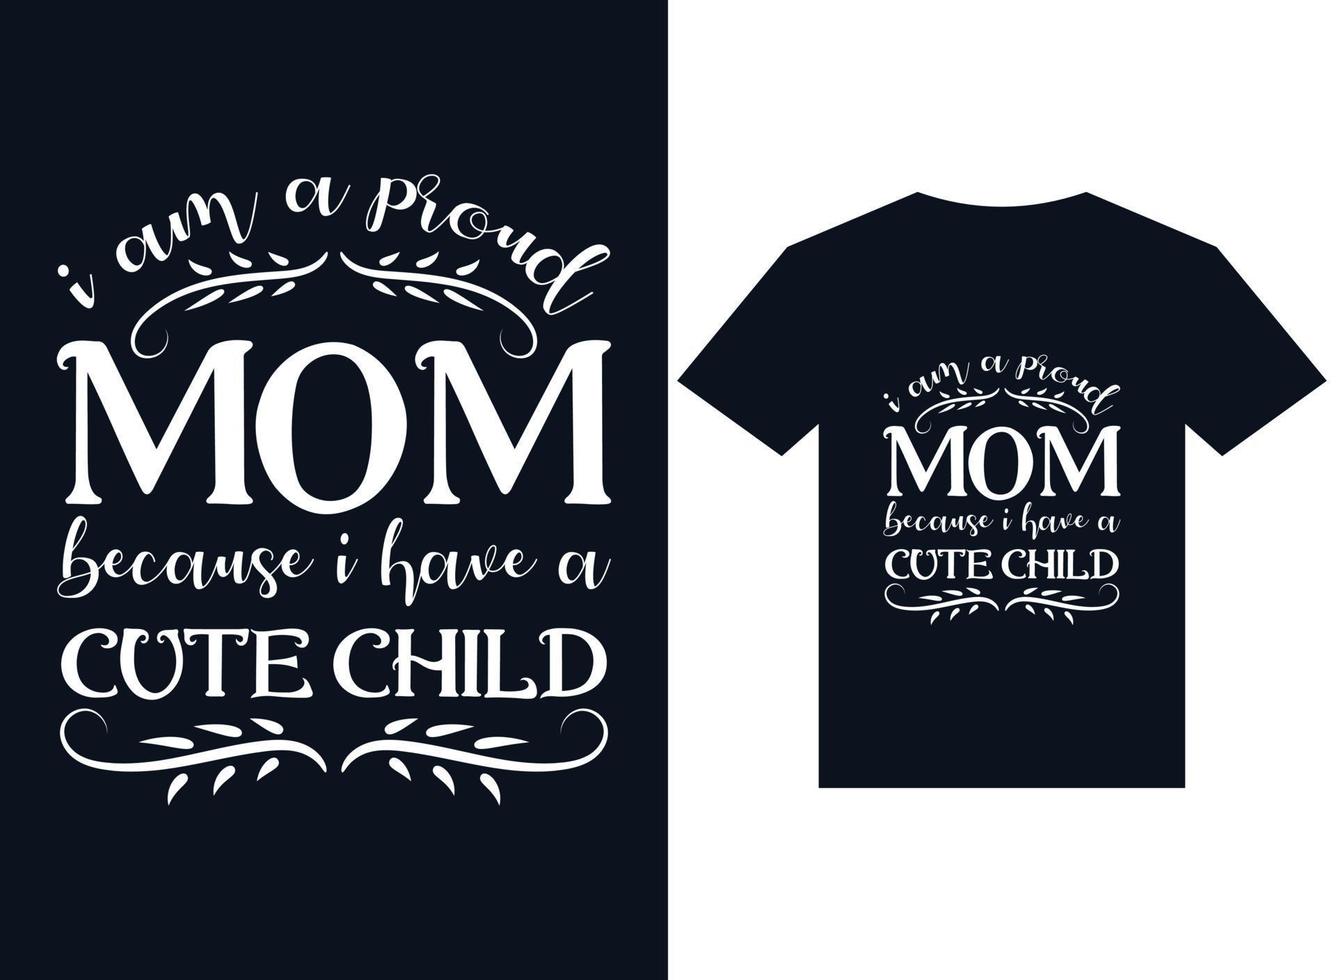 i am a proud mom because i have a cute child t-shirt design typography vector